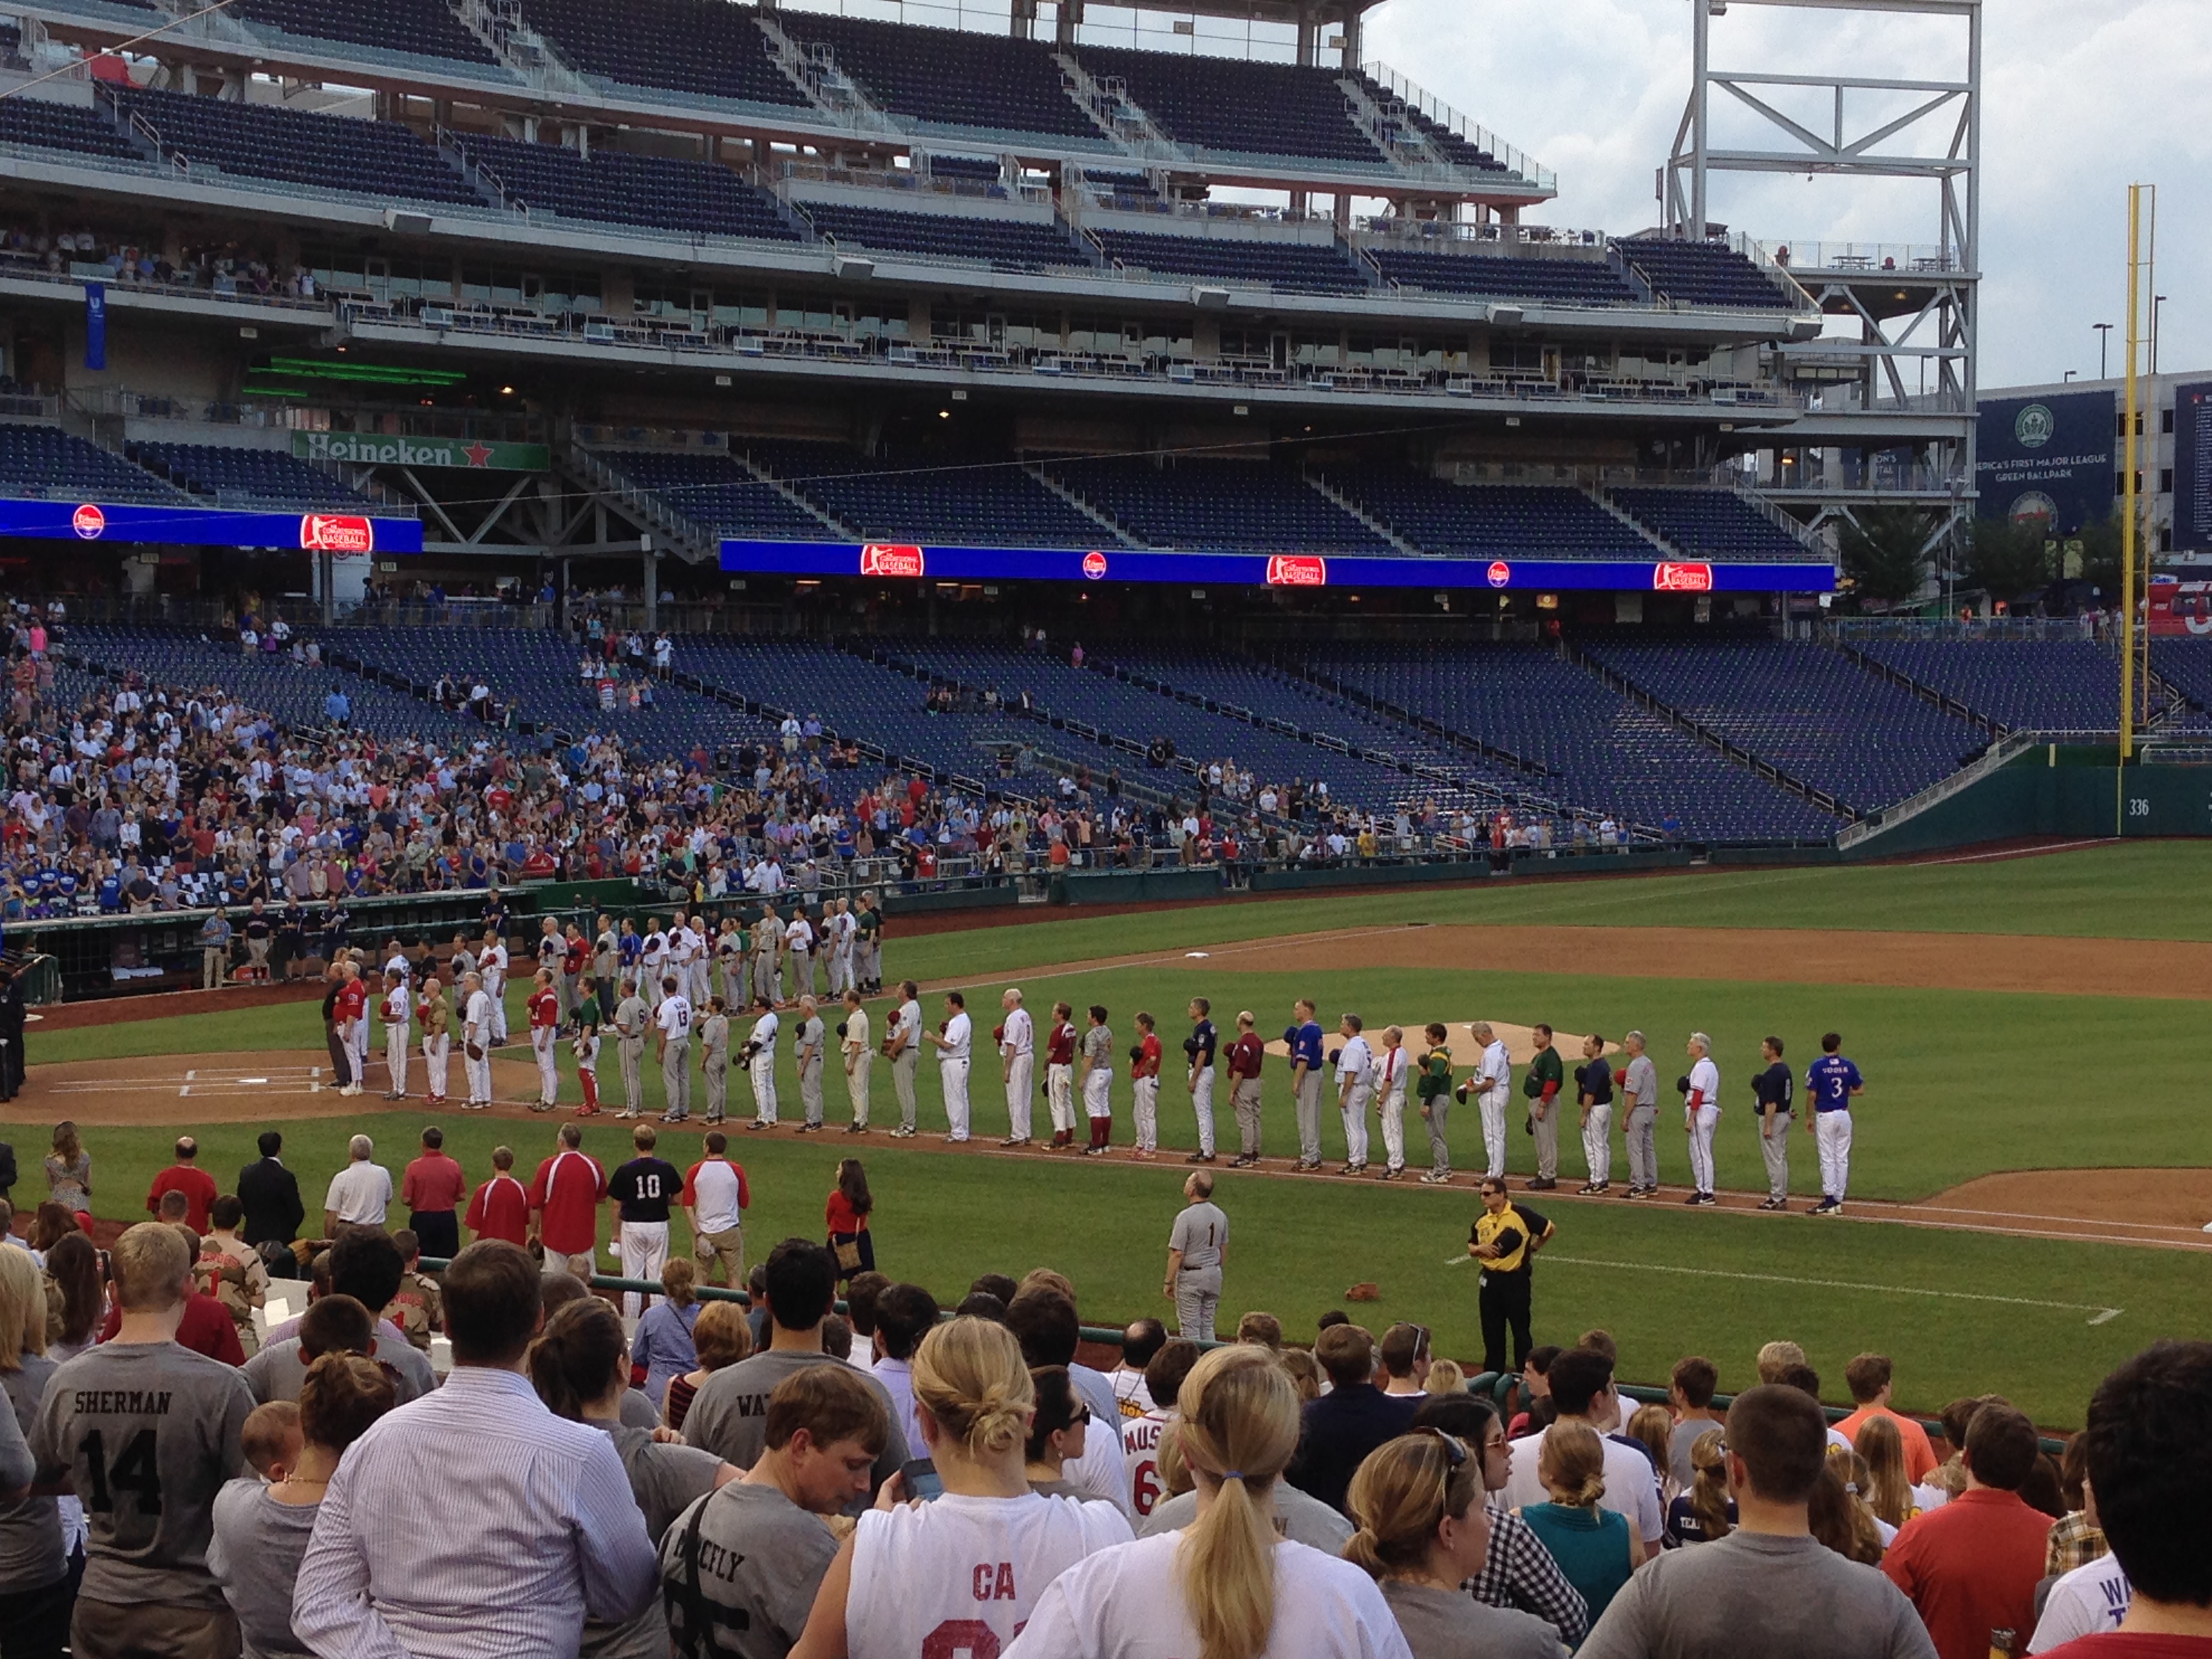 Democrats knock Republicans out of park in congressional baseball game